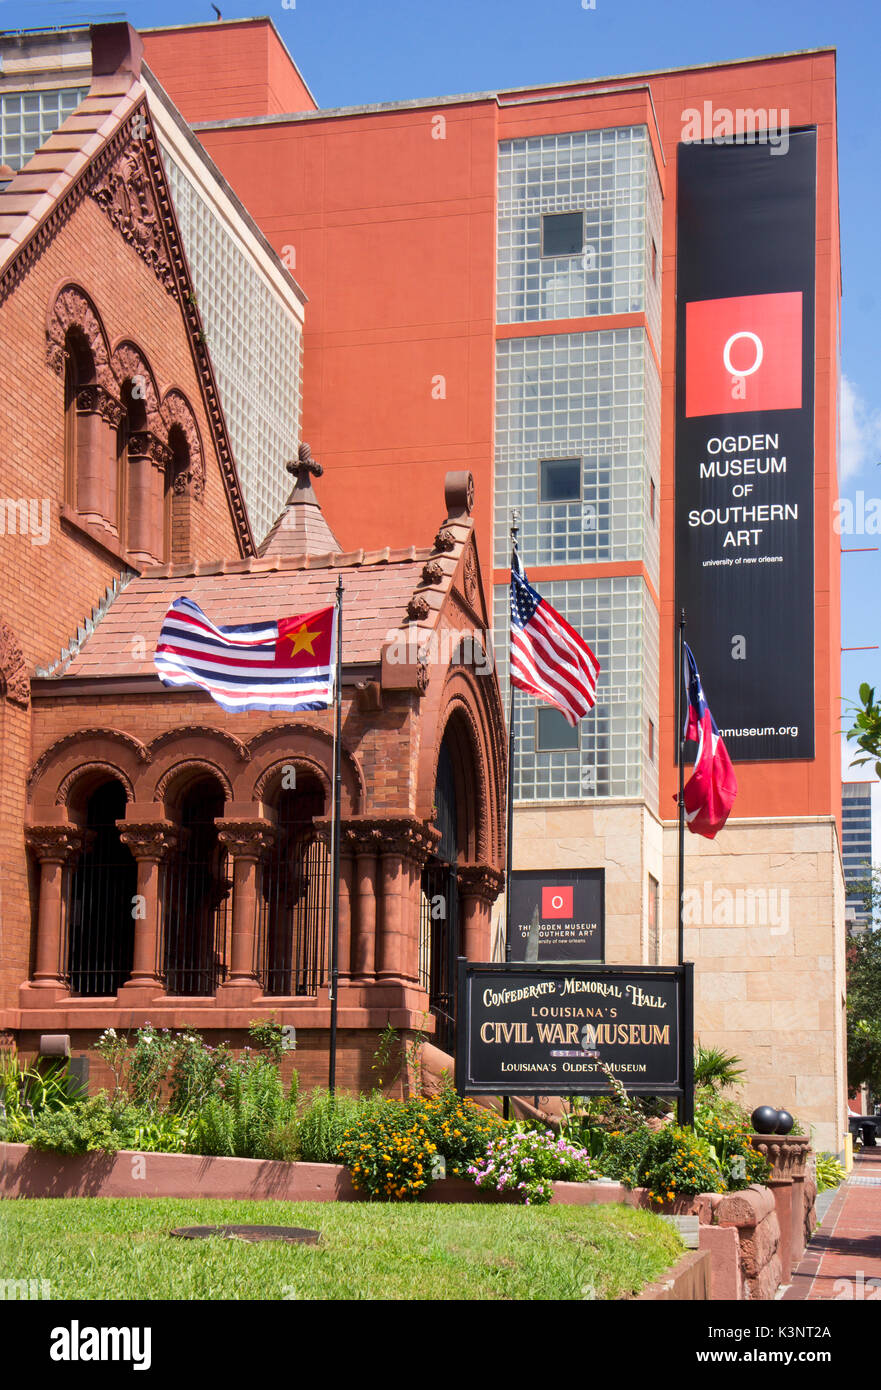 Civil War (Confederate) Museum, with the Ogden Museum to the right.  New Orleans, LA. Stock Photo